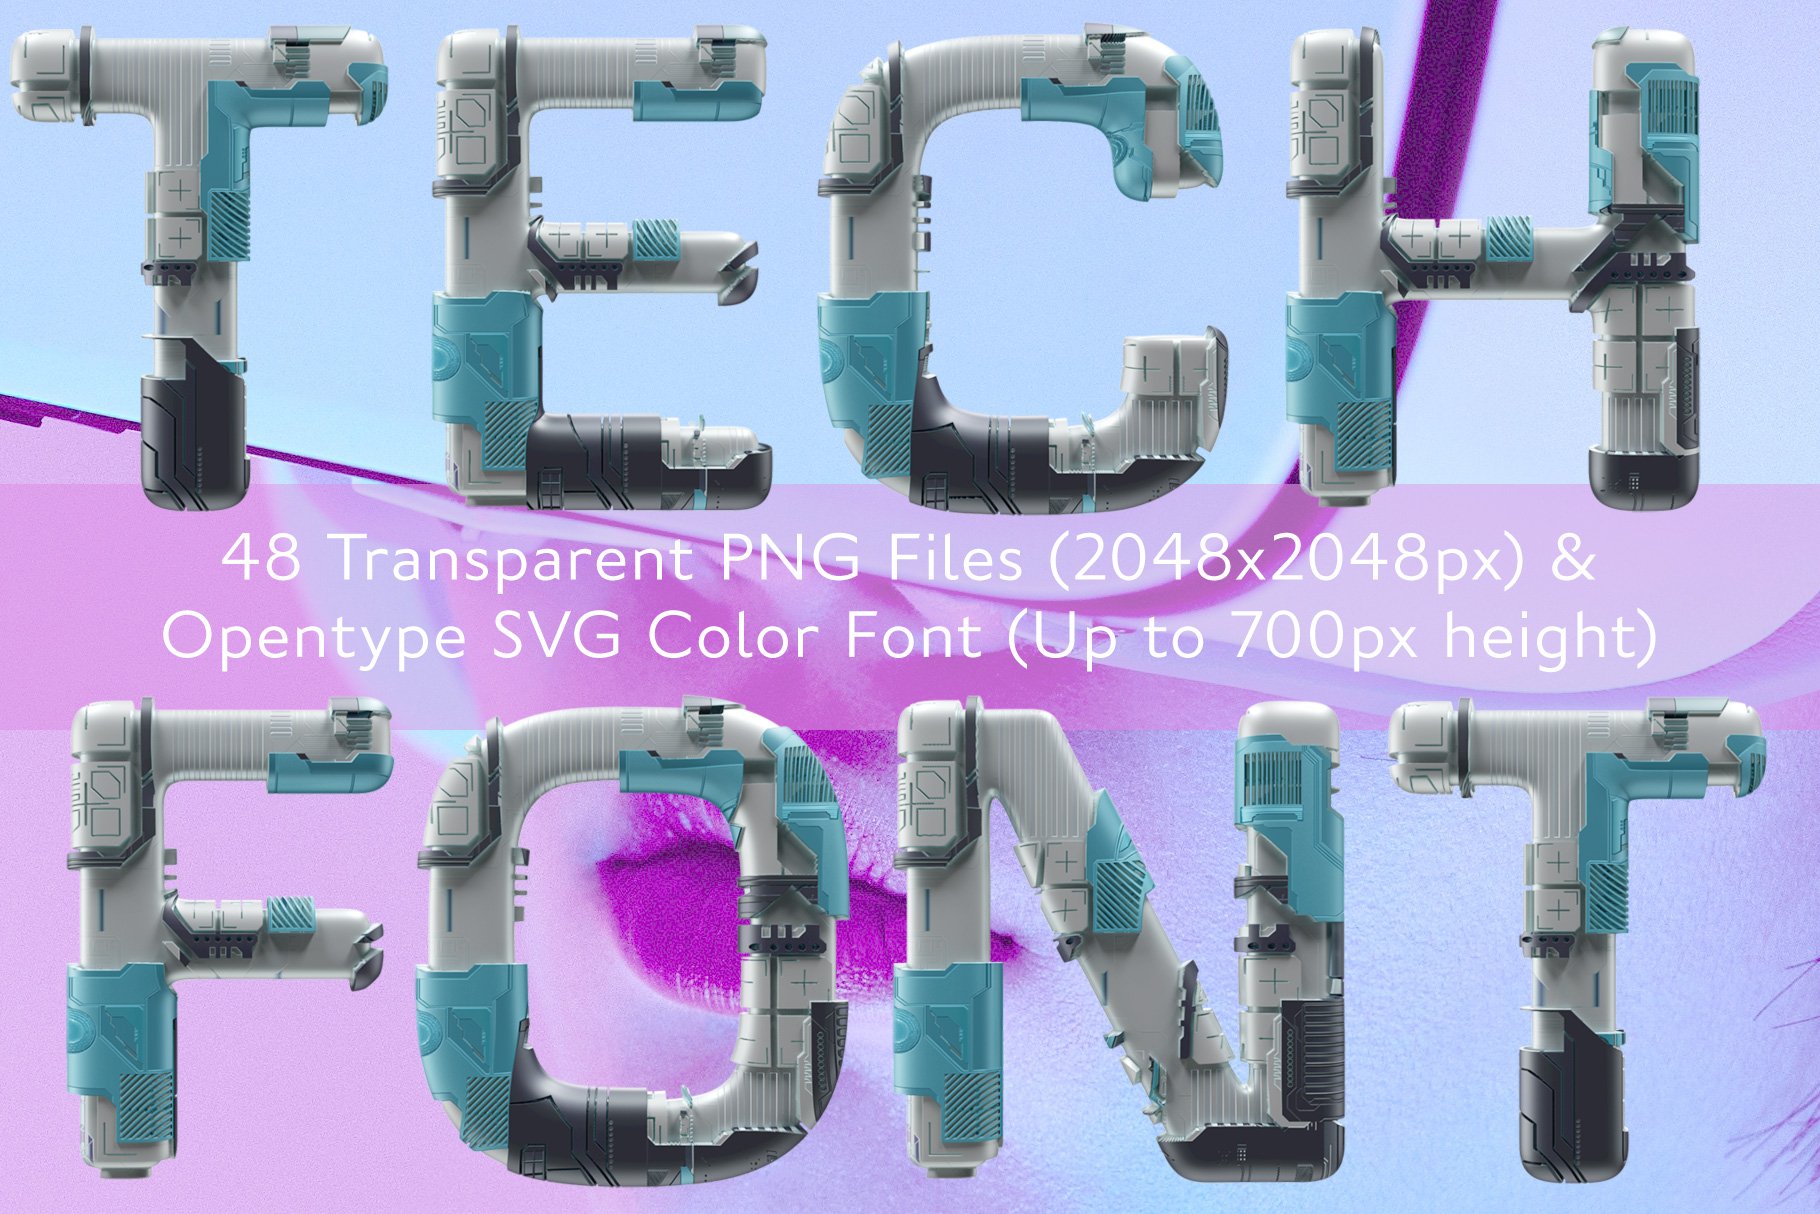 MS Tech Opentype Color Font and PNGs cover image.